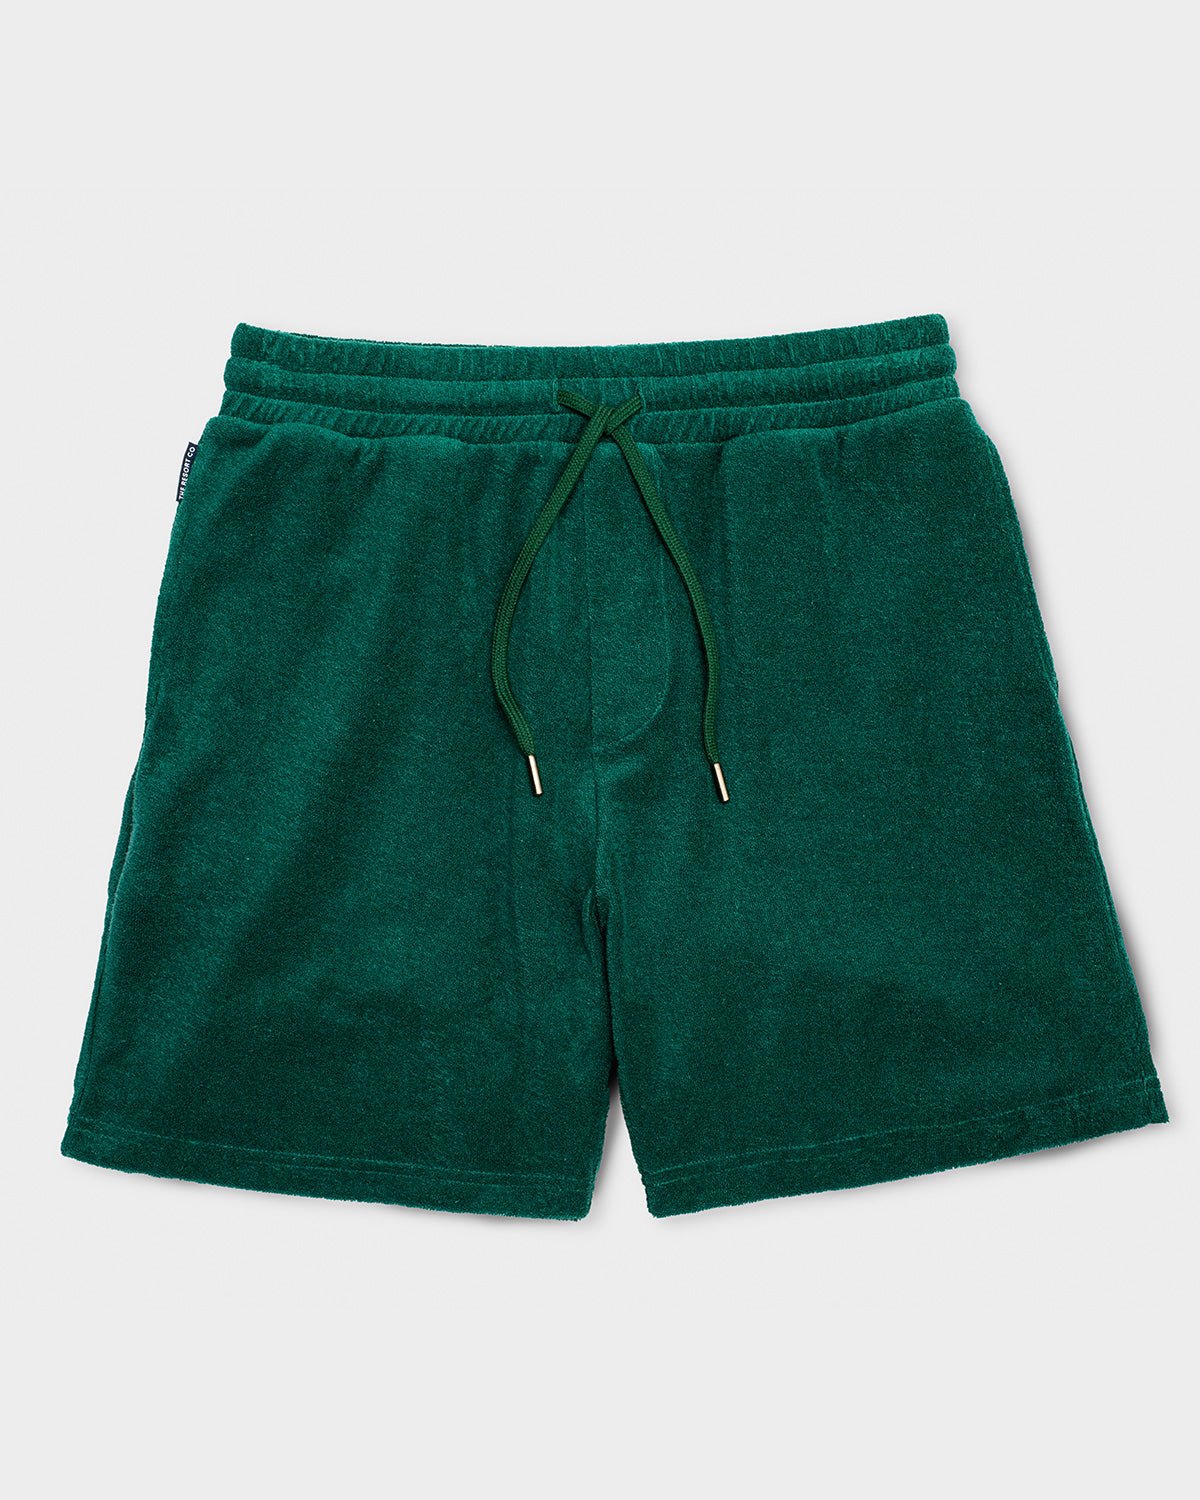 Terry Shorts Emerald Green - THE RESORT CO